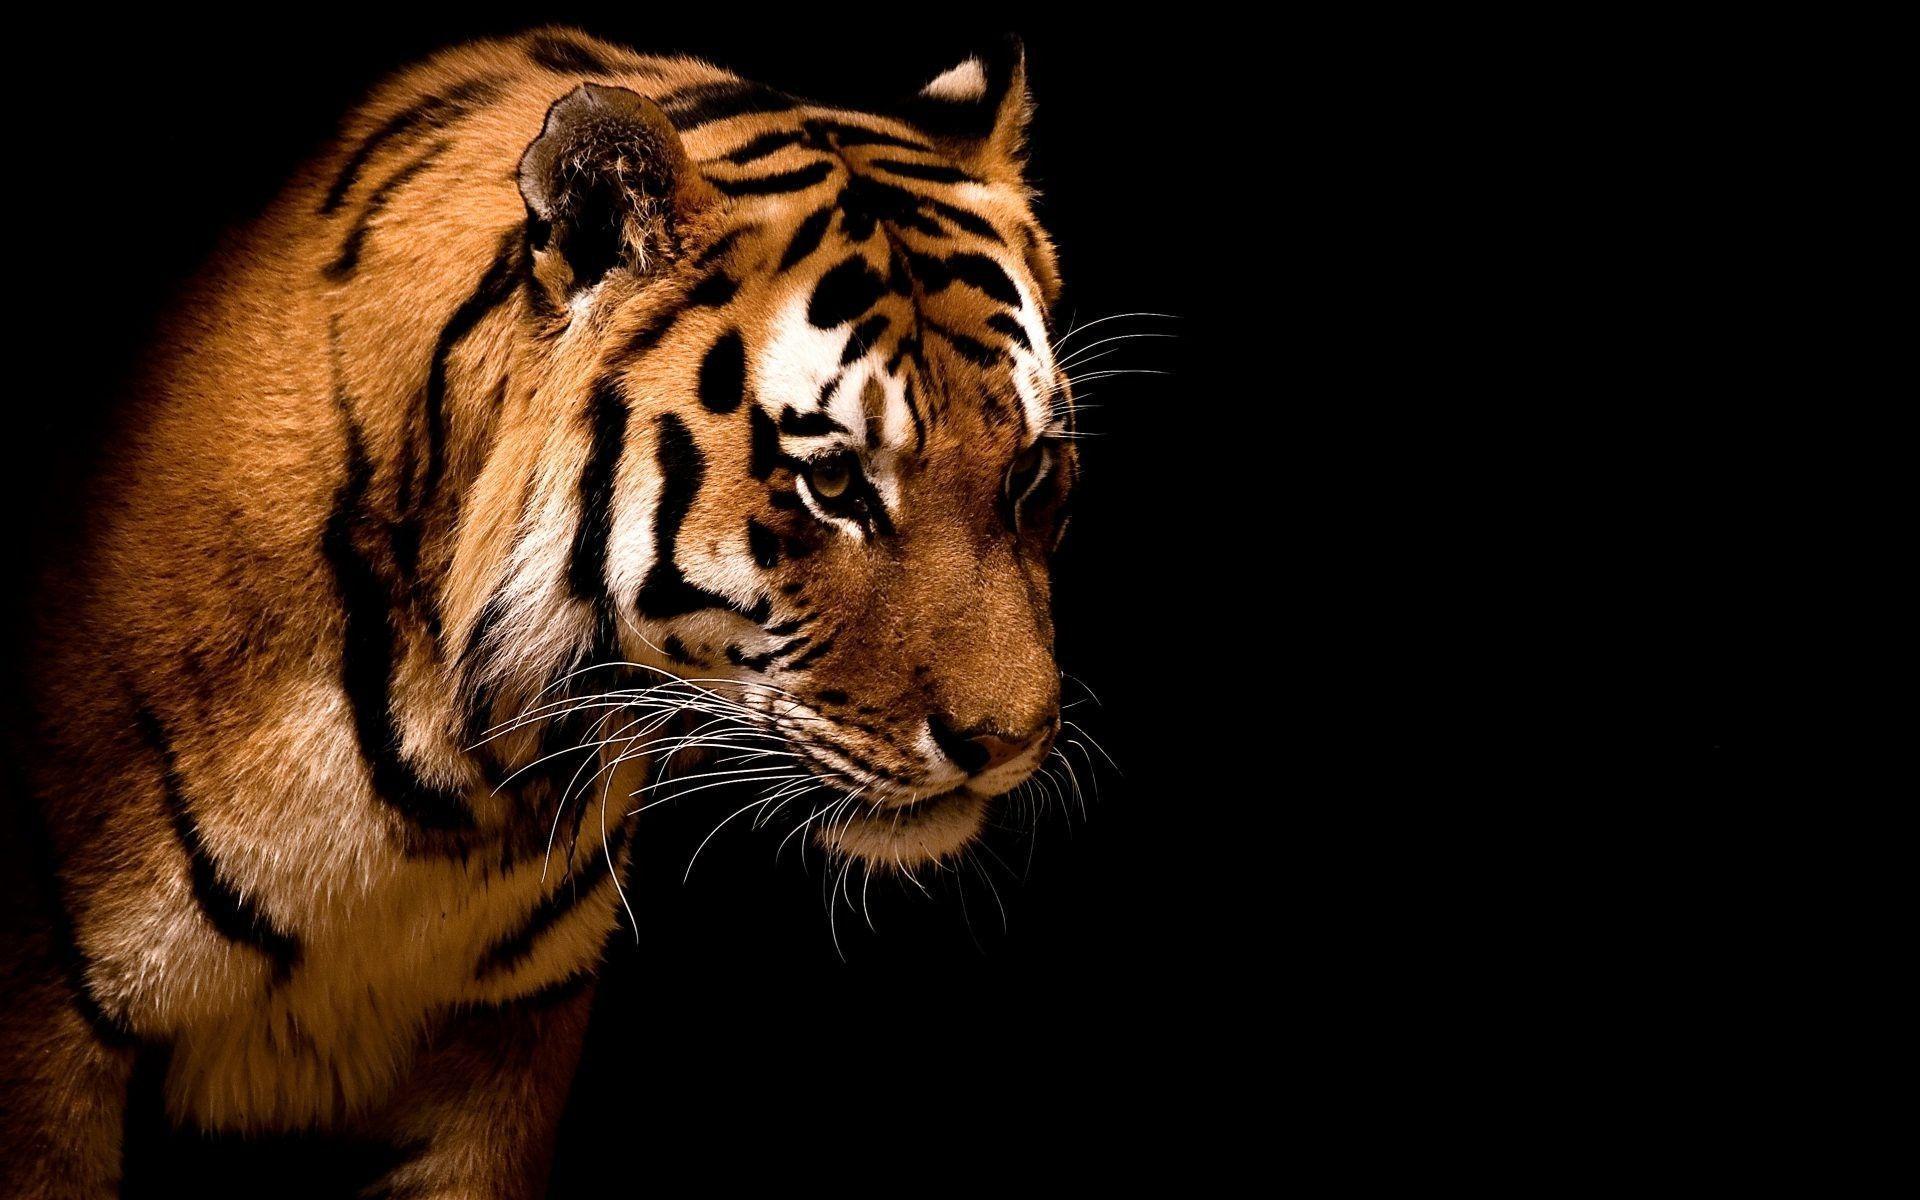 Tiger Backgrounds Pictures - Wallpaper Cave